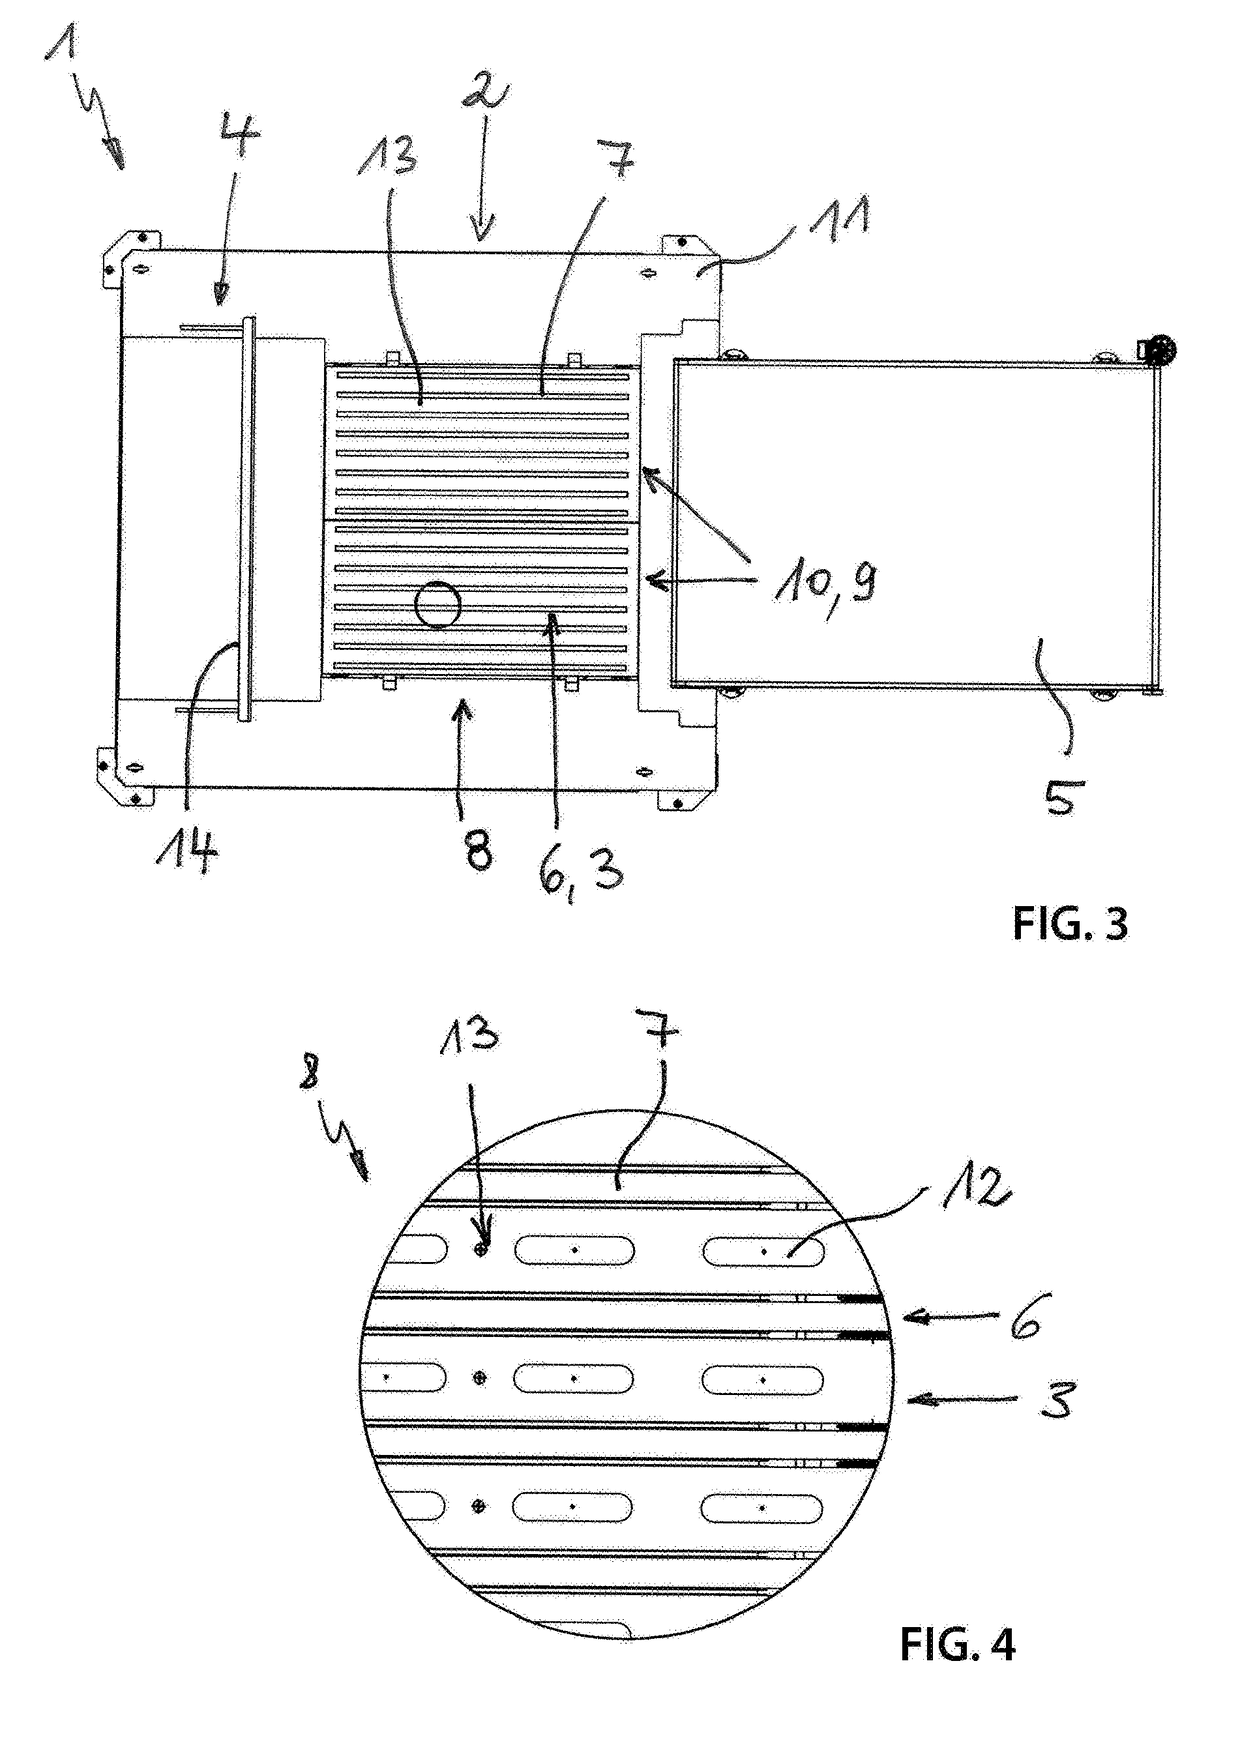 De-stacking device for de-stacking layers of transport pallets with or without intermediary layers